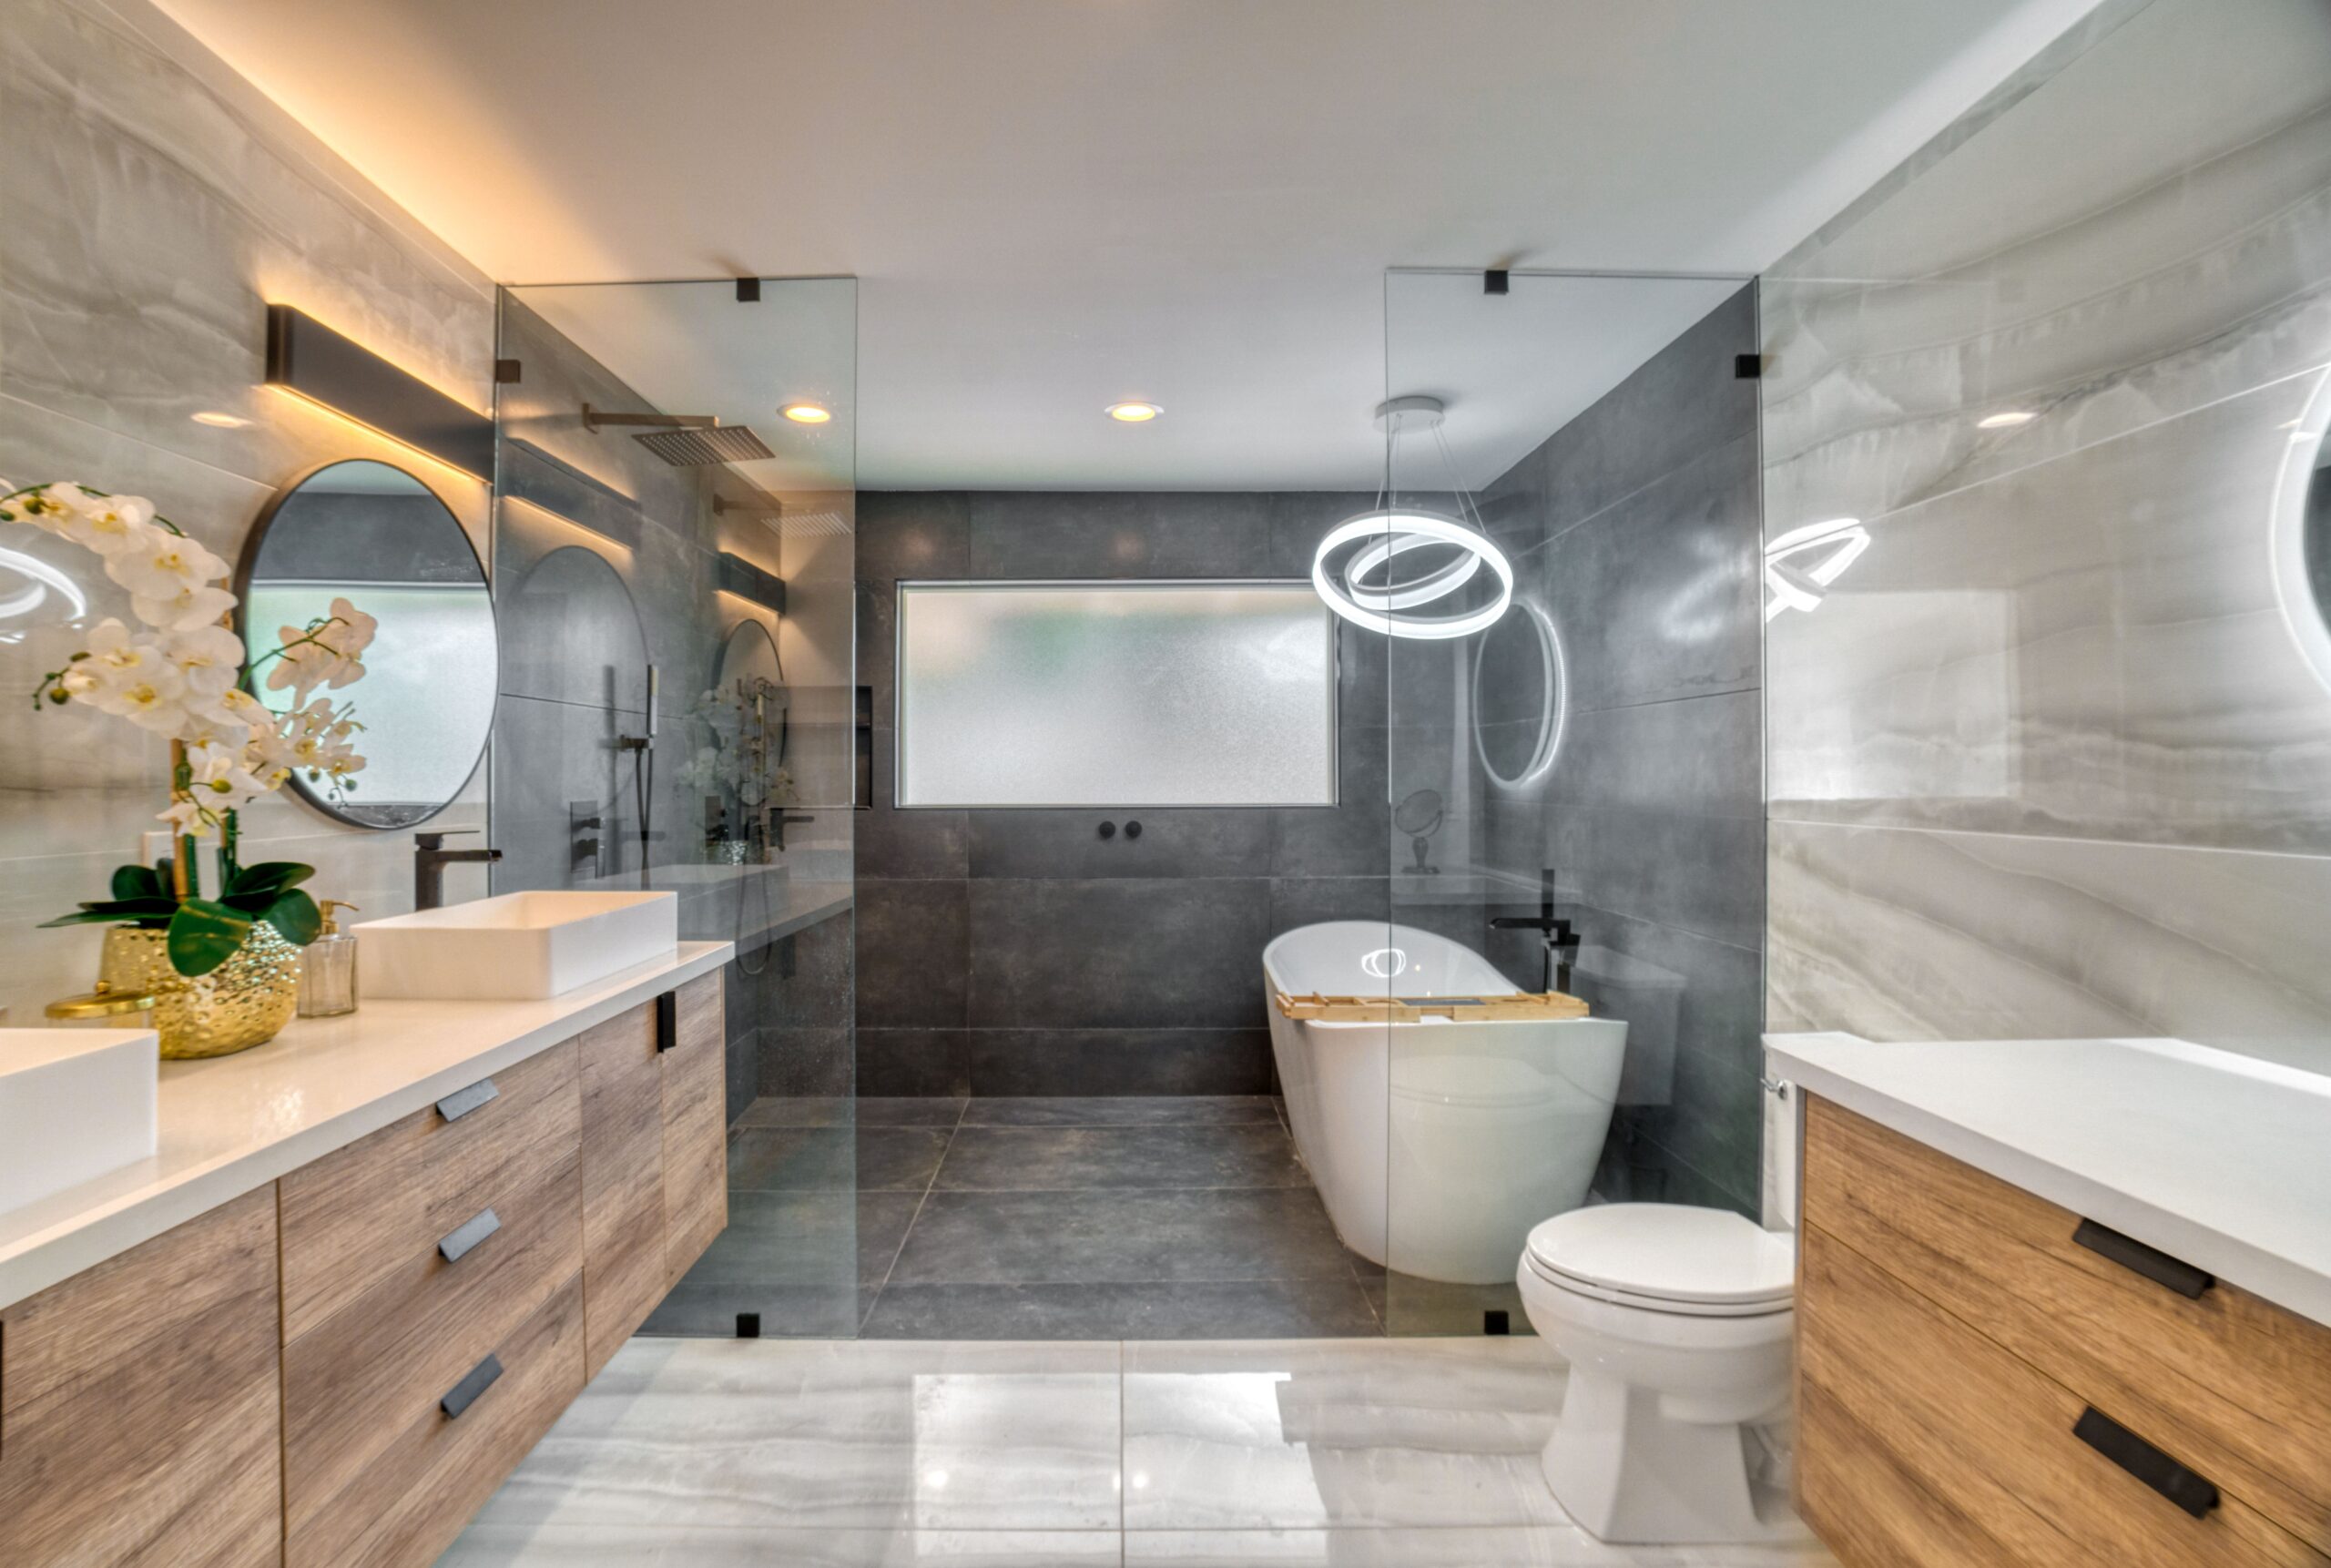 San Diego Bathroom Remodeling Contractor by Lusso Design and Build